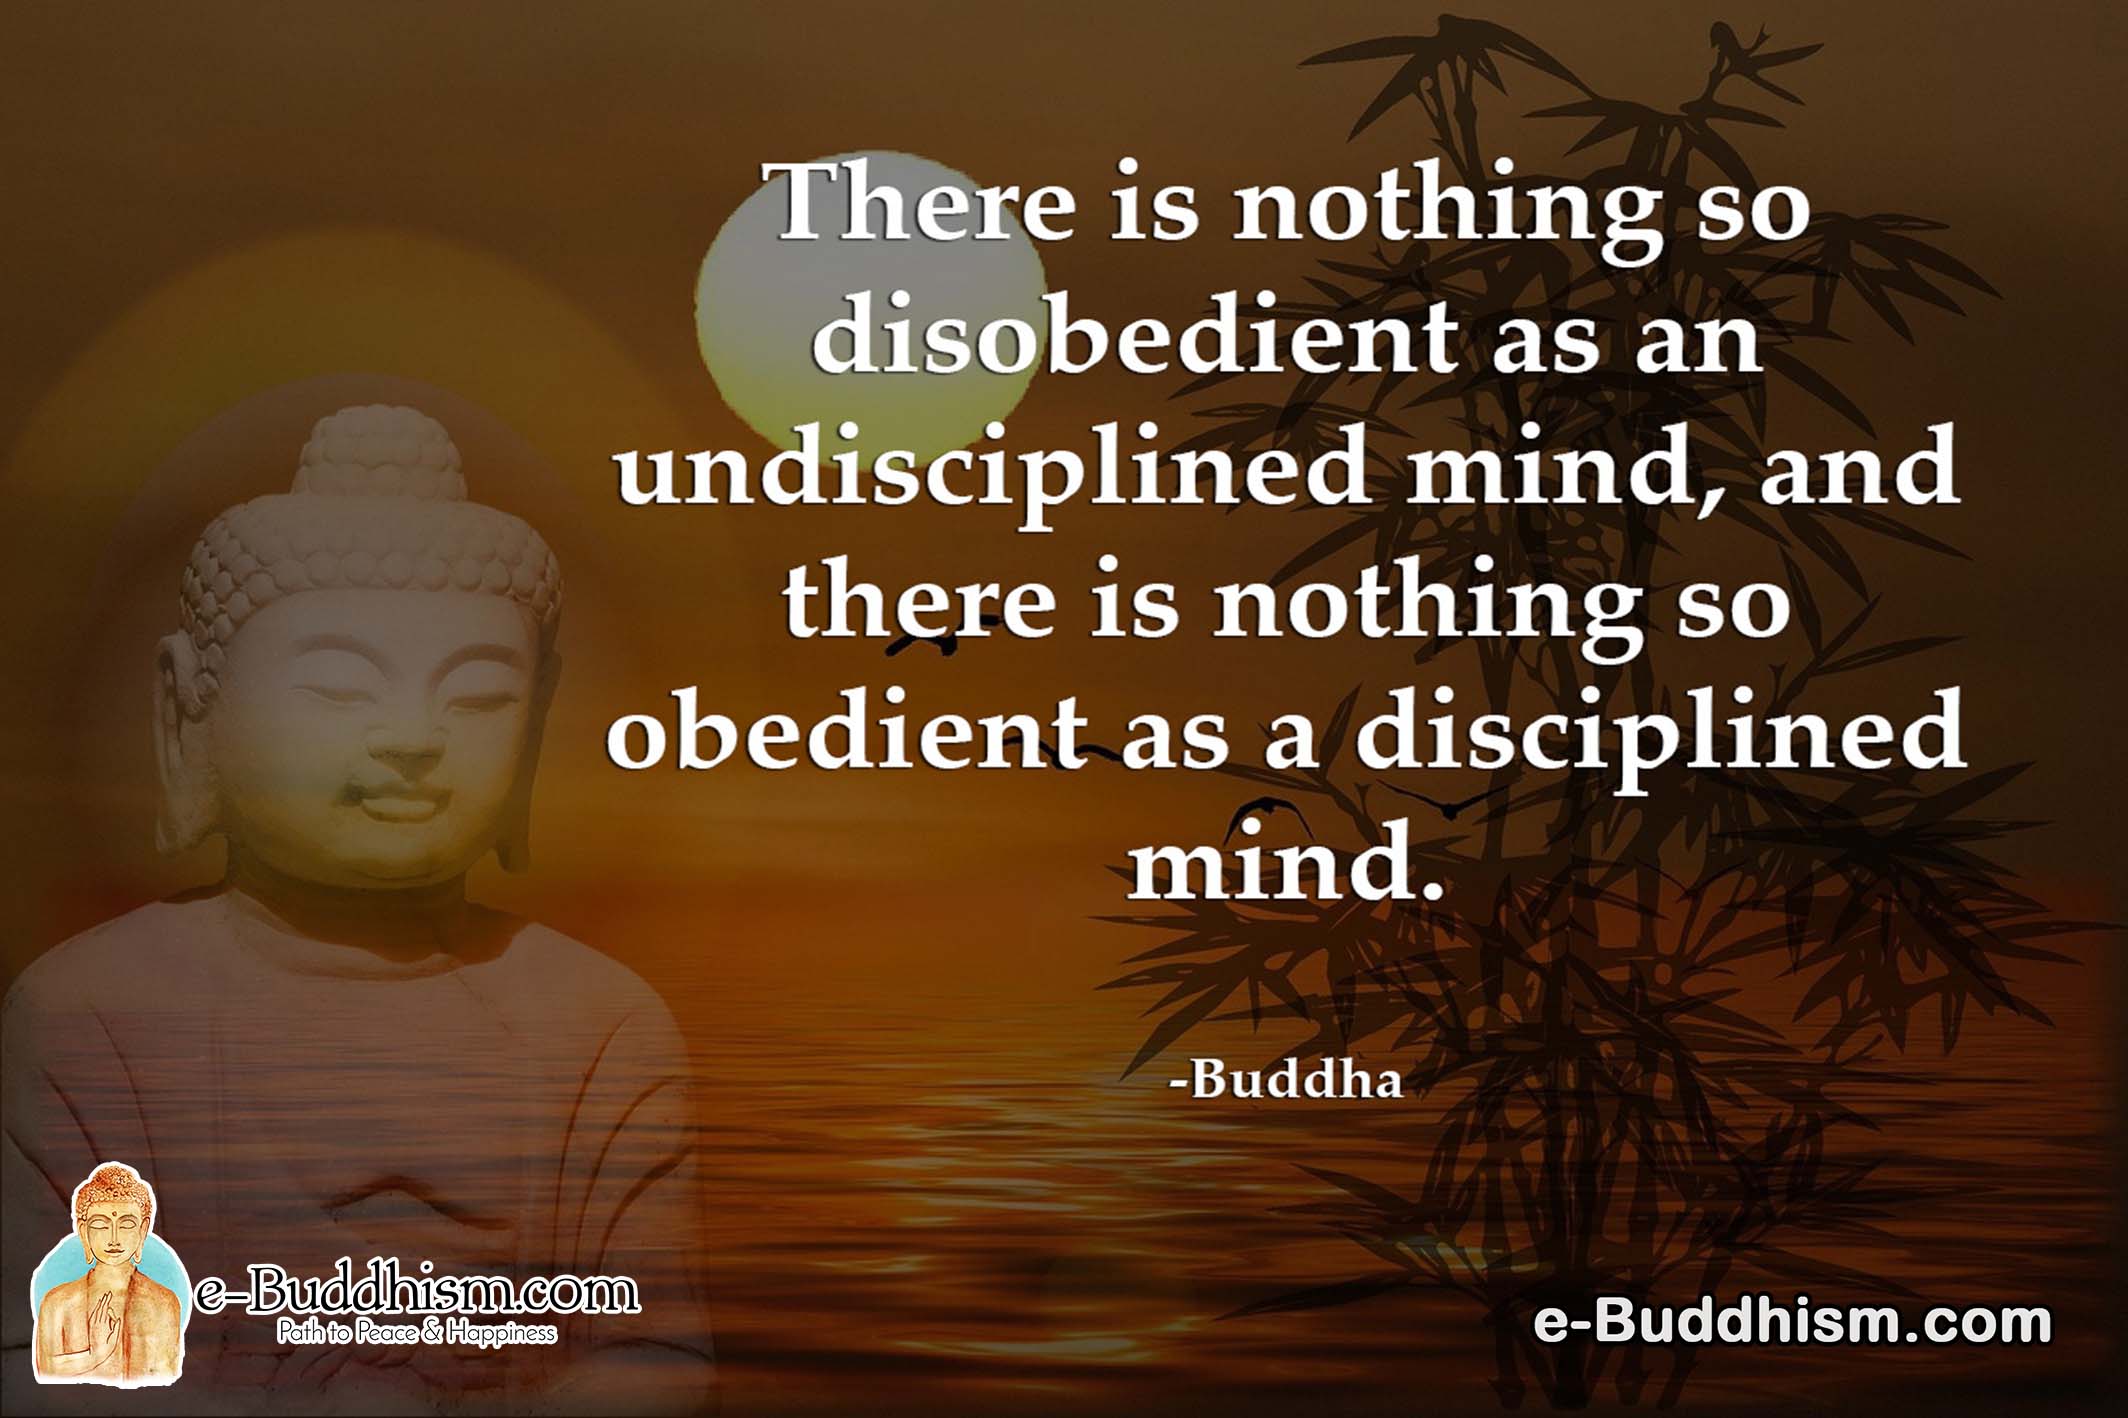 There is nothing so disobedient as an undisciplined mind, and there is nothing so obedient as a disciplined mind. -Buddha